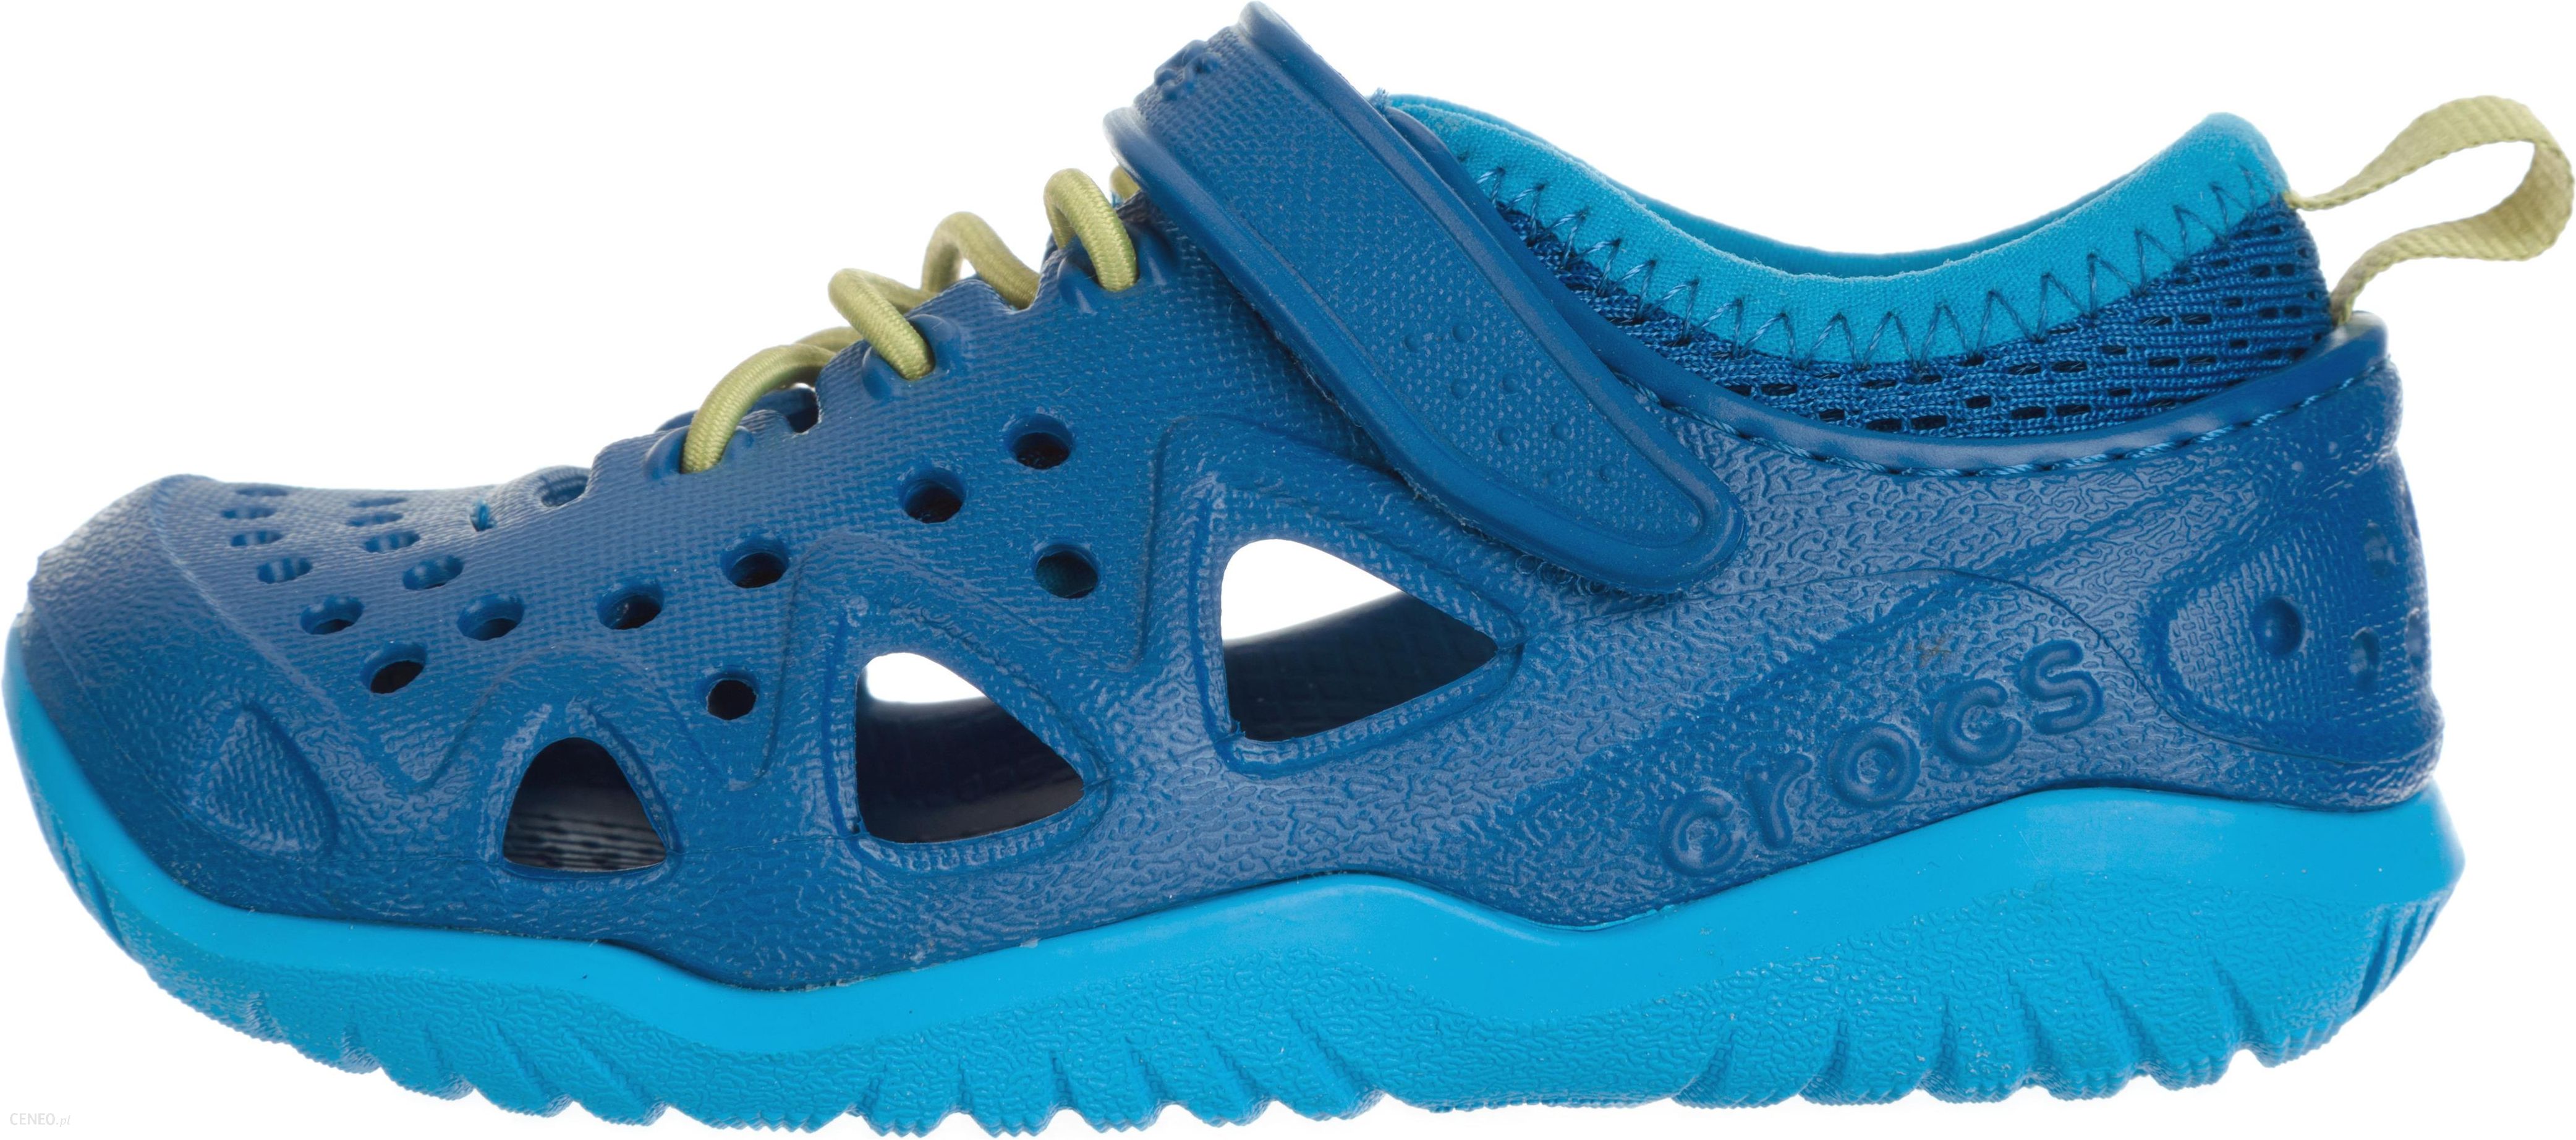 crocs swiftwater play